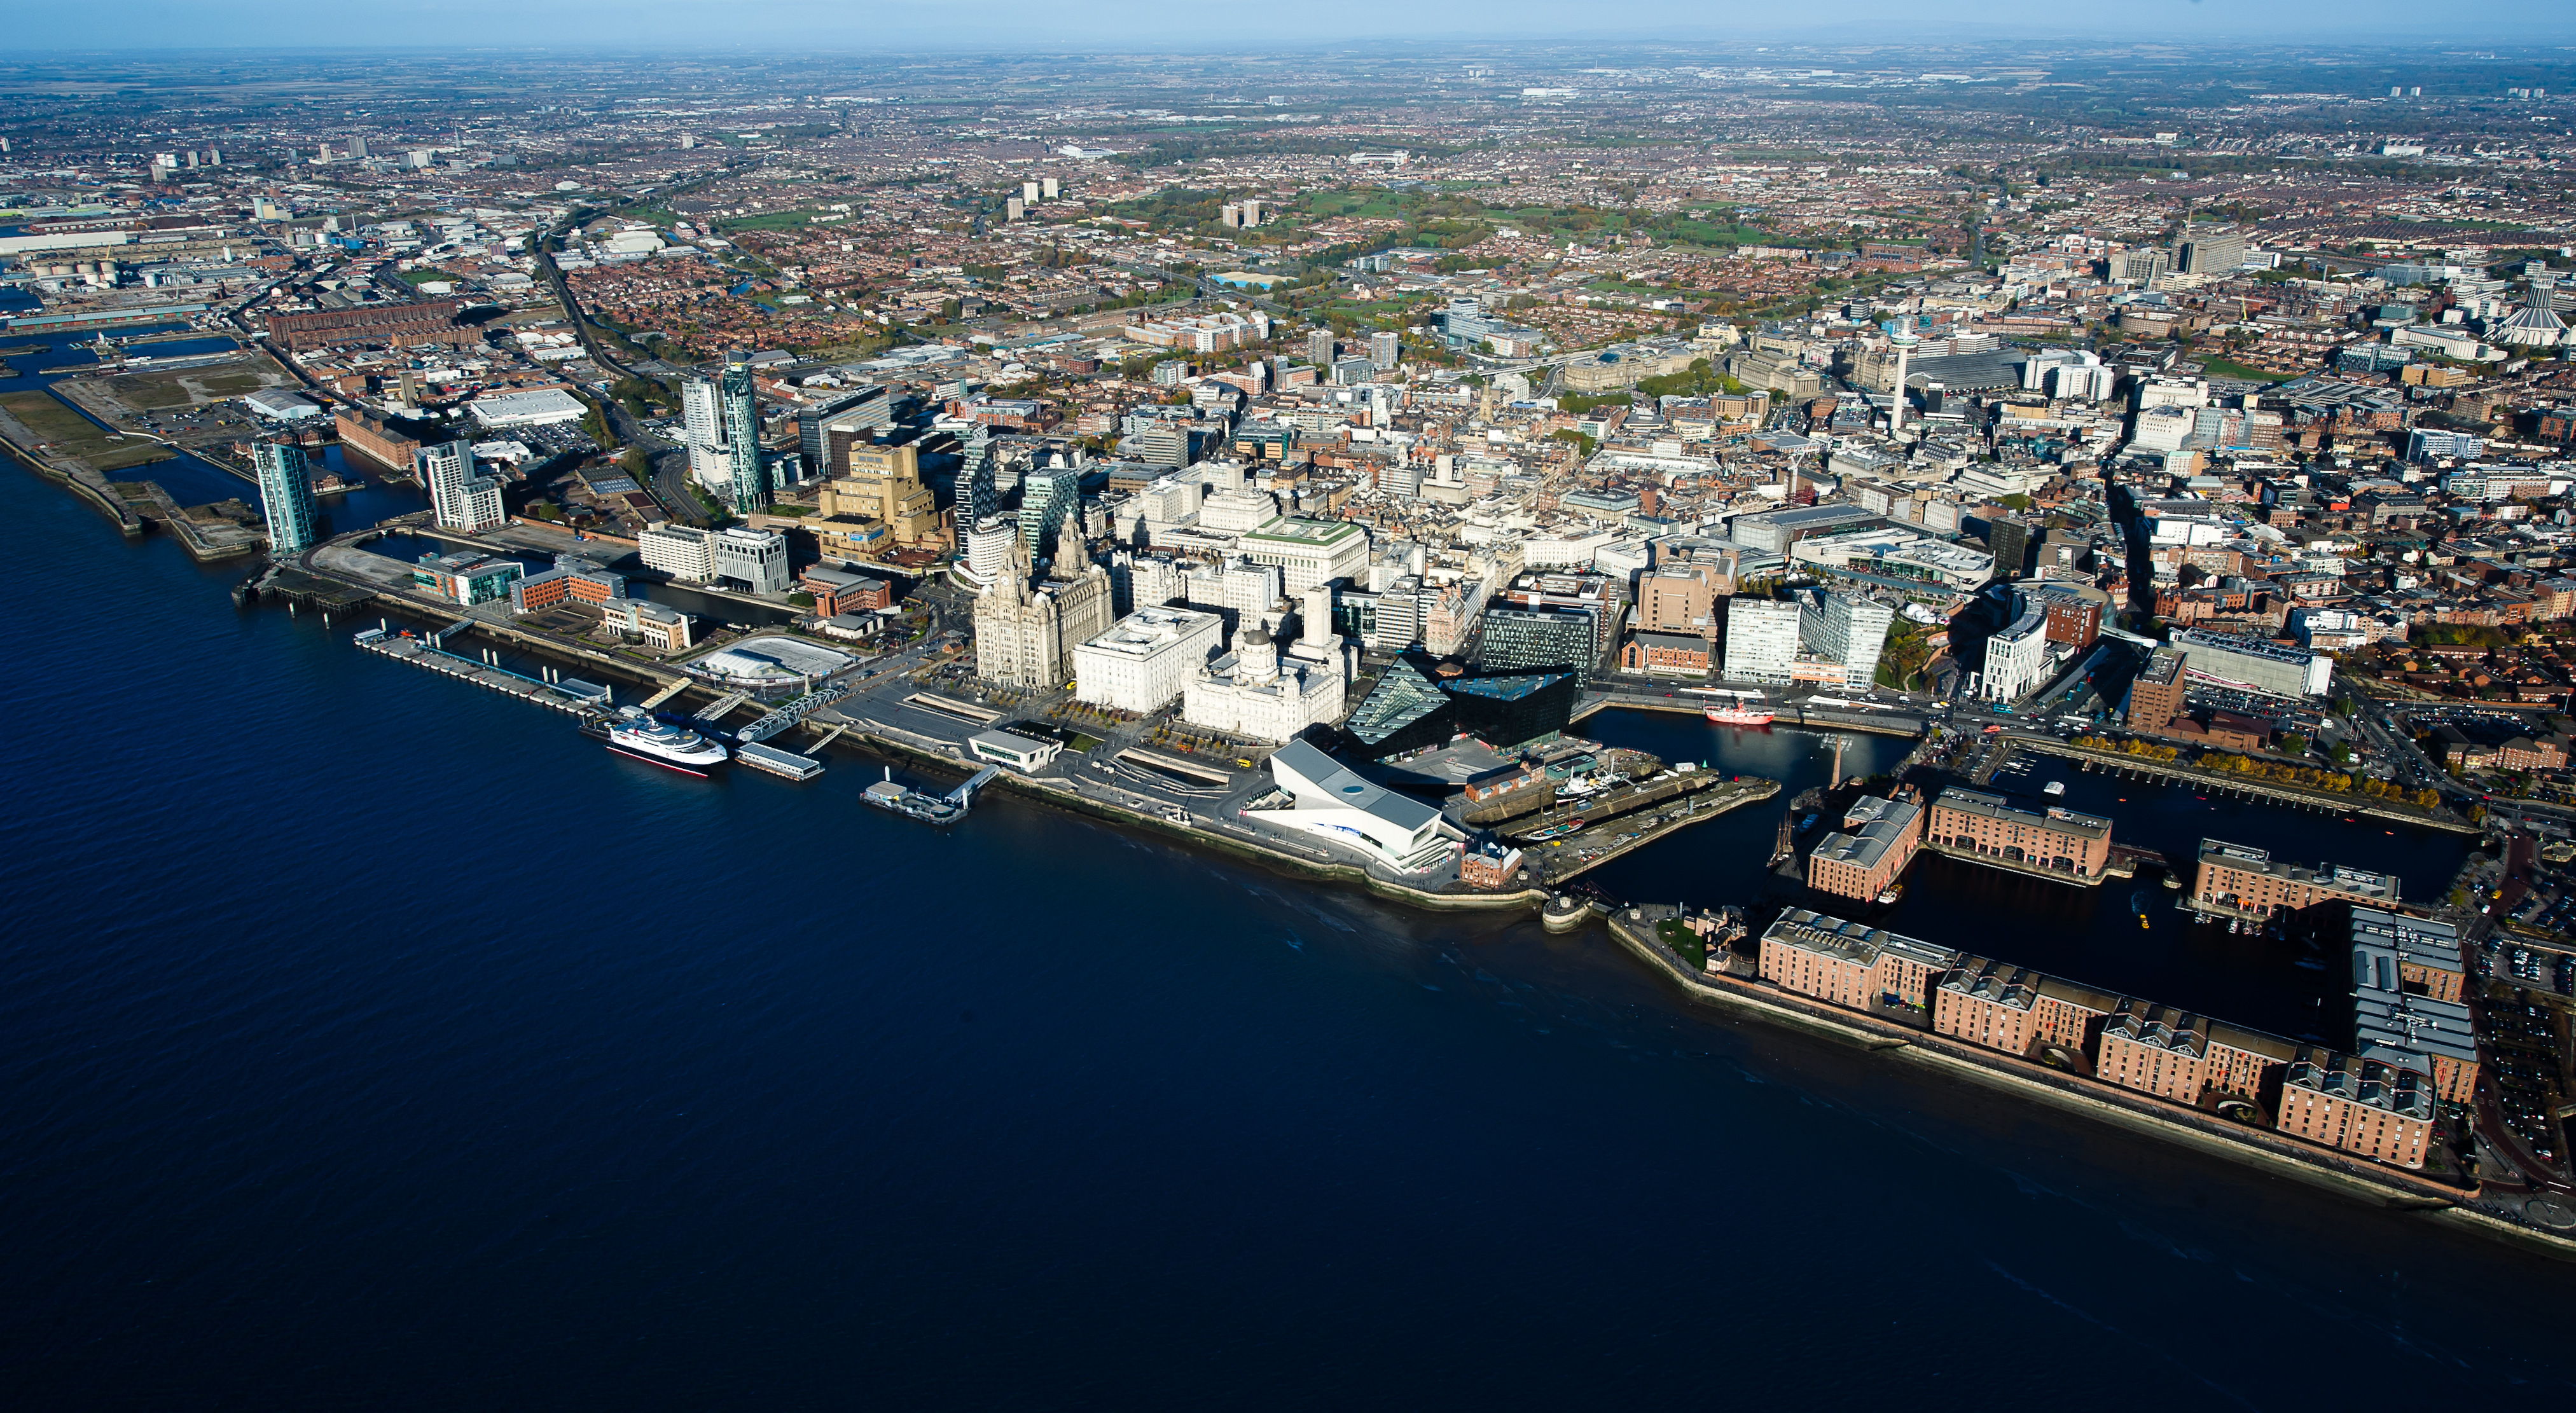 Liverpool is ranked as the UK'S Greatest Sporting City - The Guide Liverpool4050 x 2222